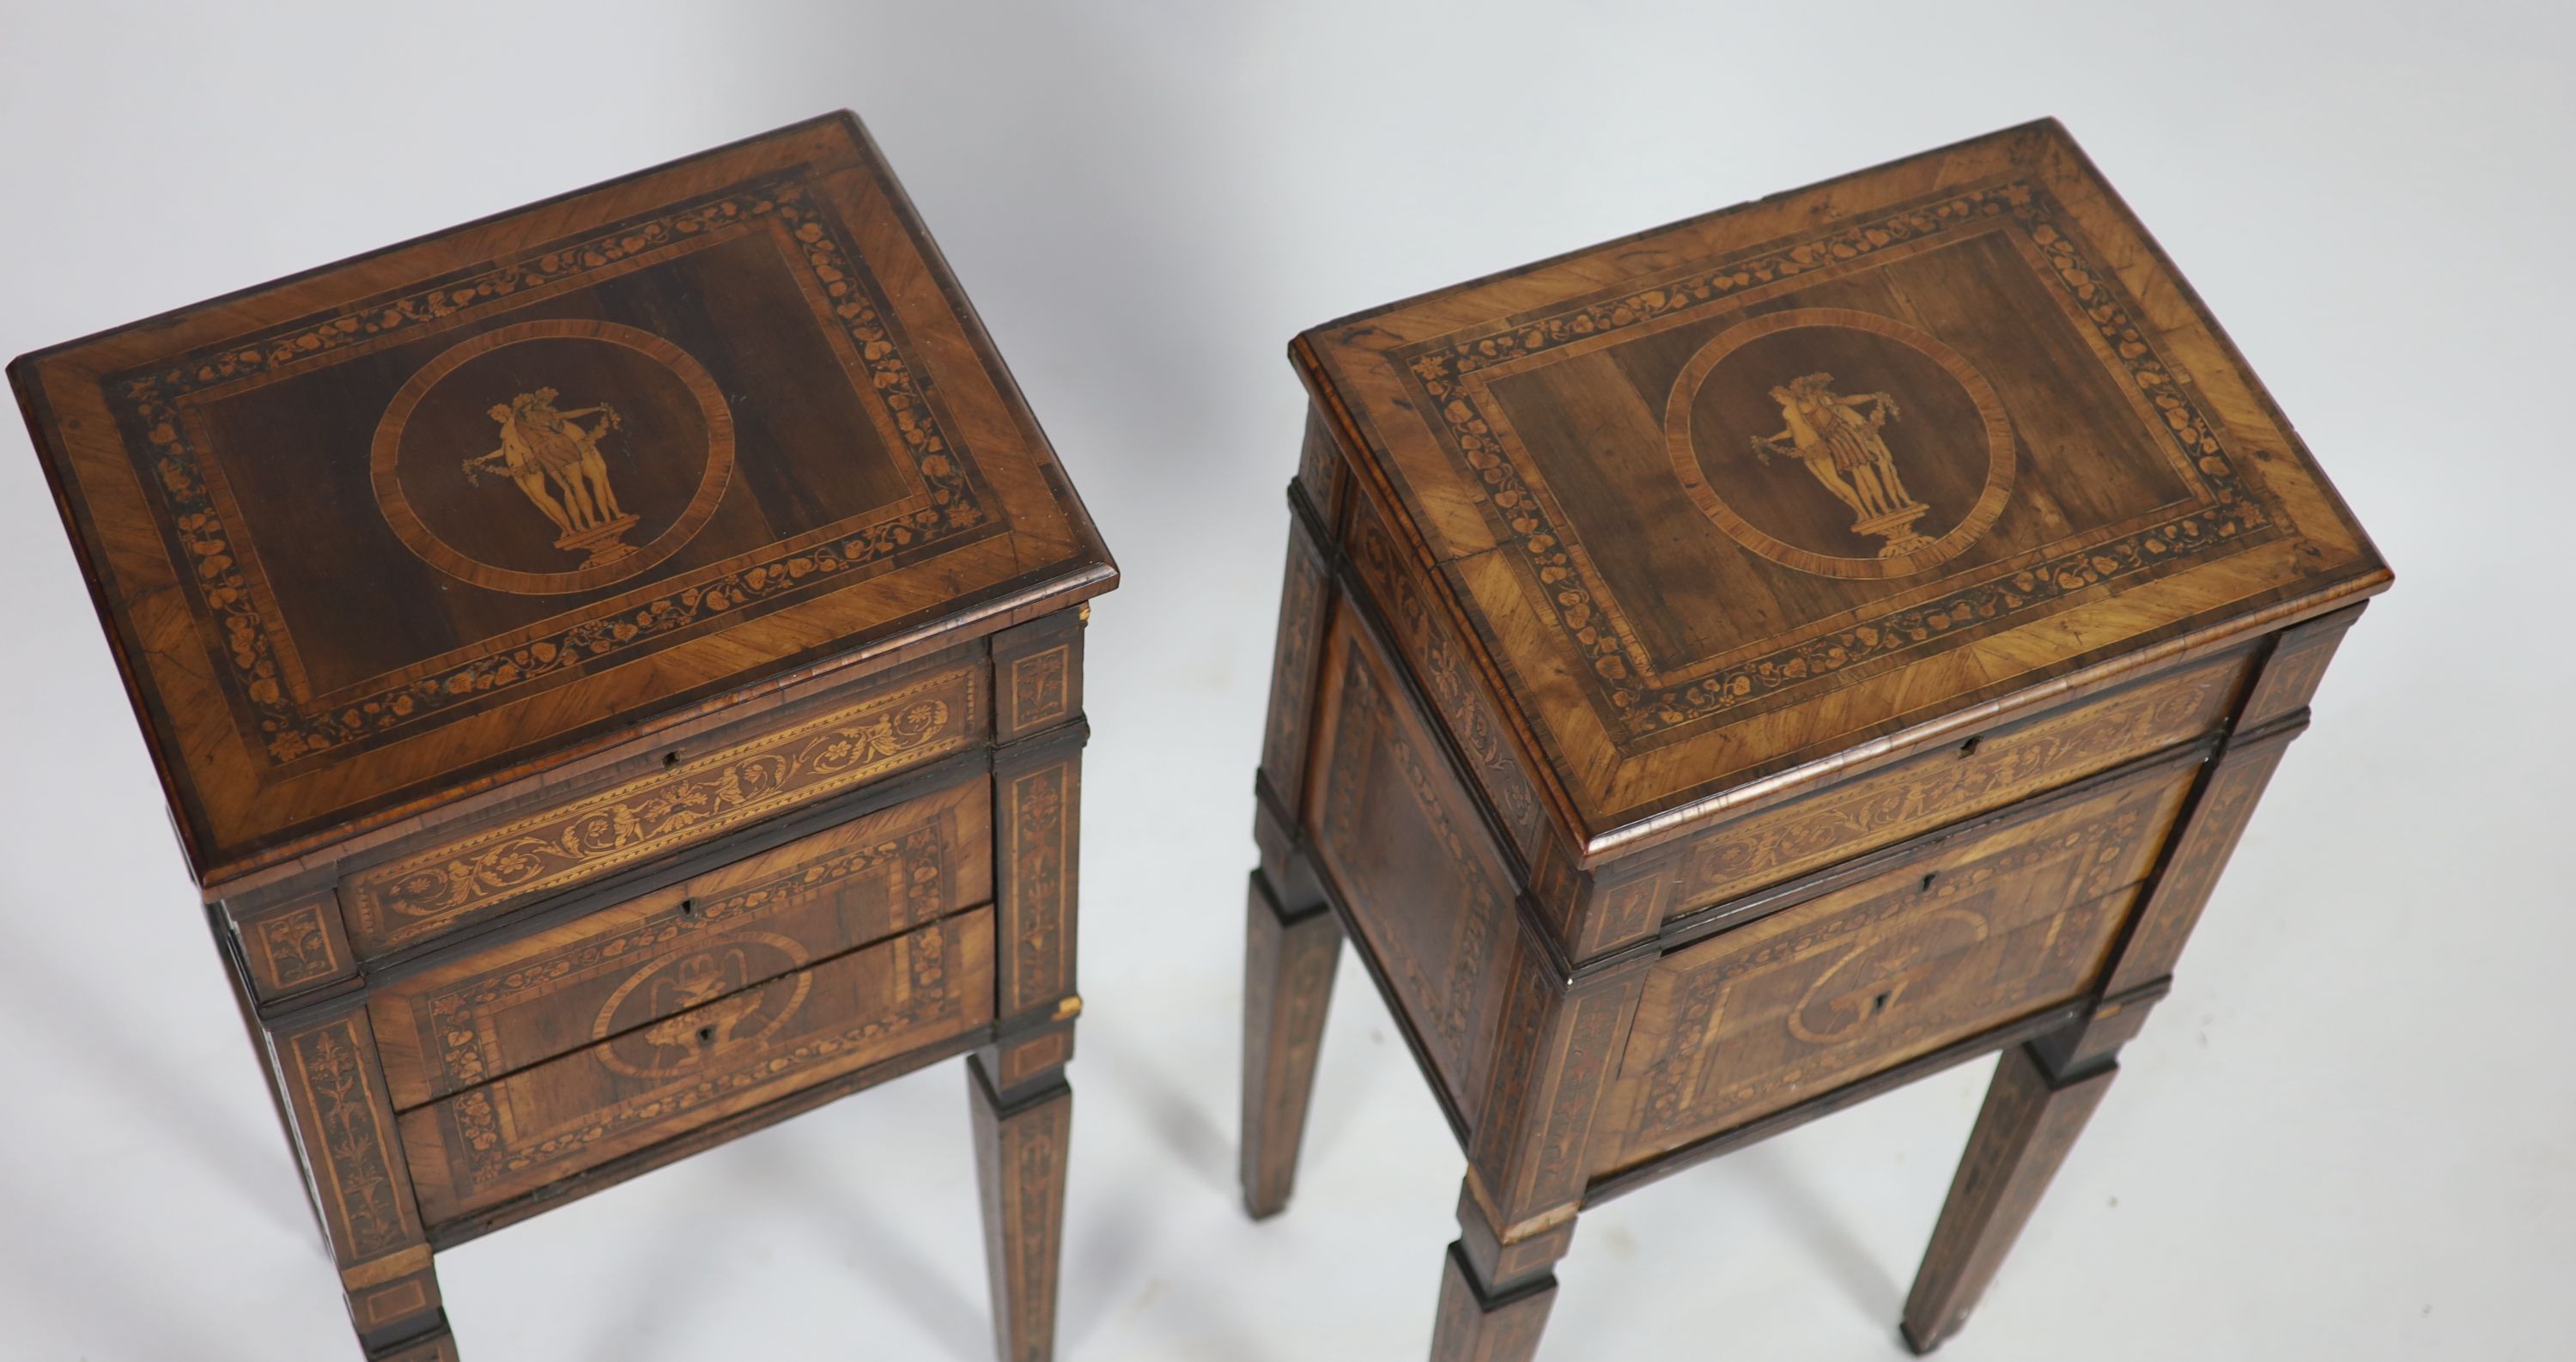 A pair of 18th century Italian Milanese walnut and marquetry neo-classical 'Comodini' in the manner of Giuseppe Maggiolini, W 41cm D 31cm H 81cm